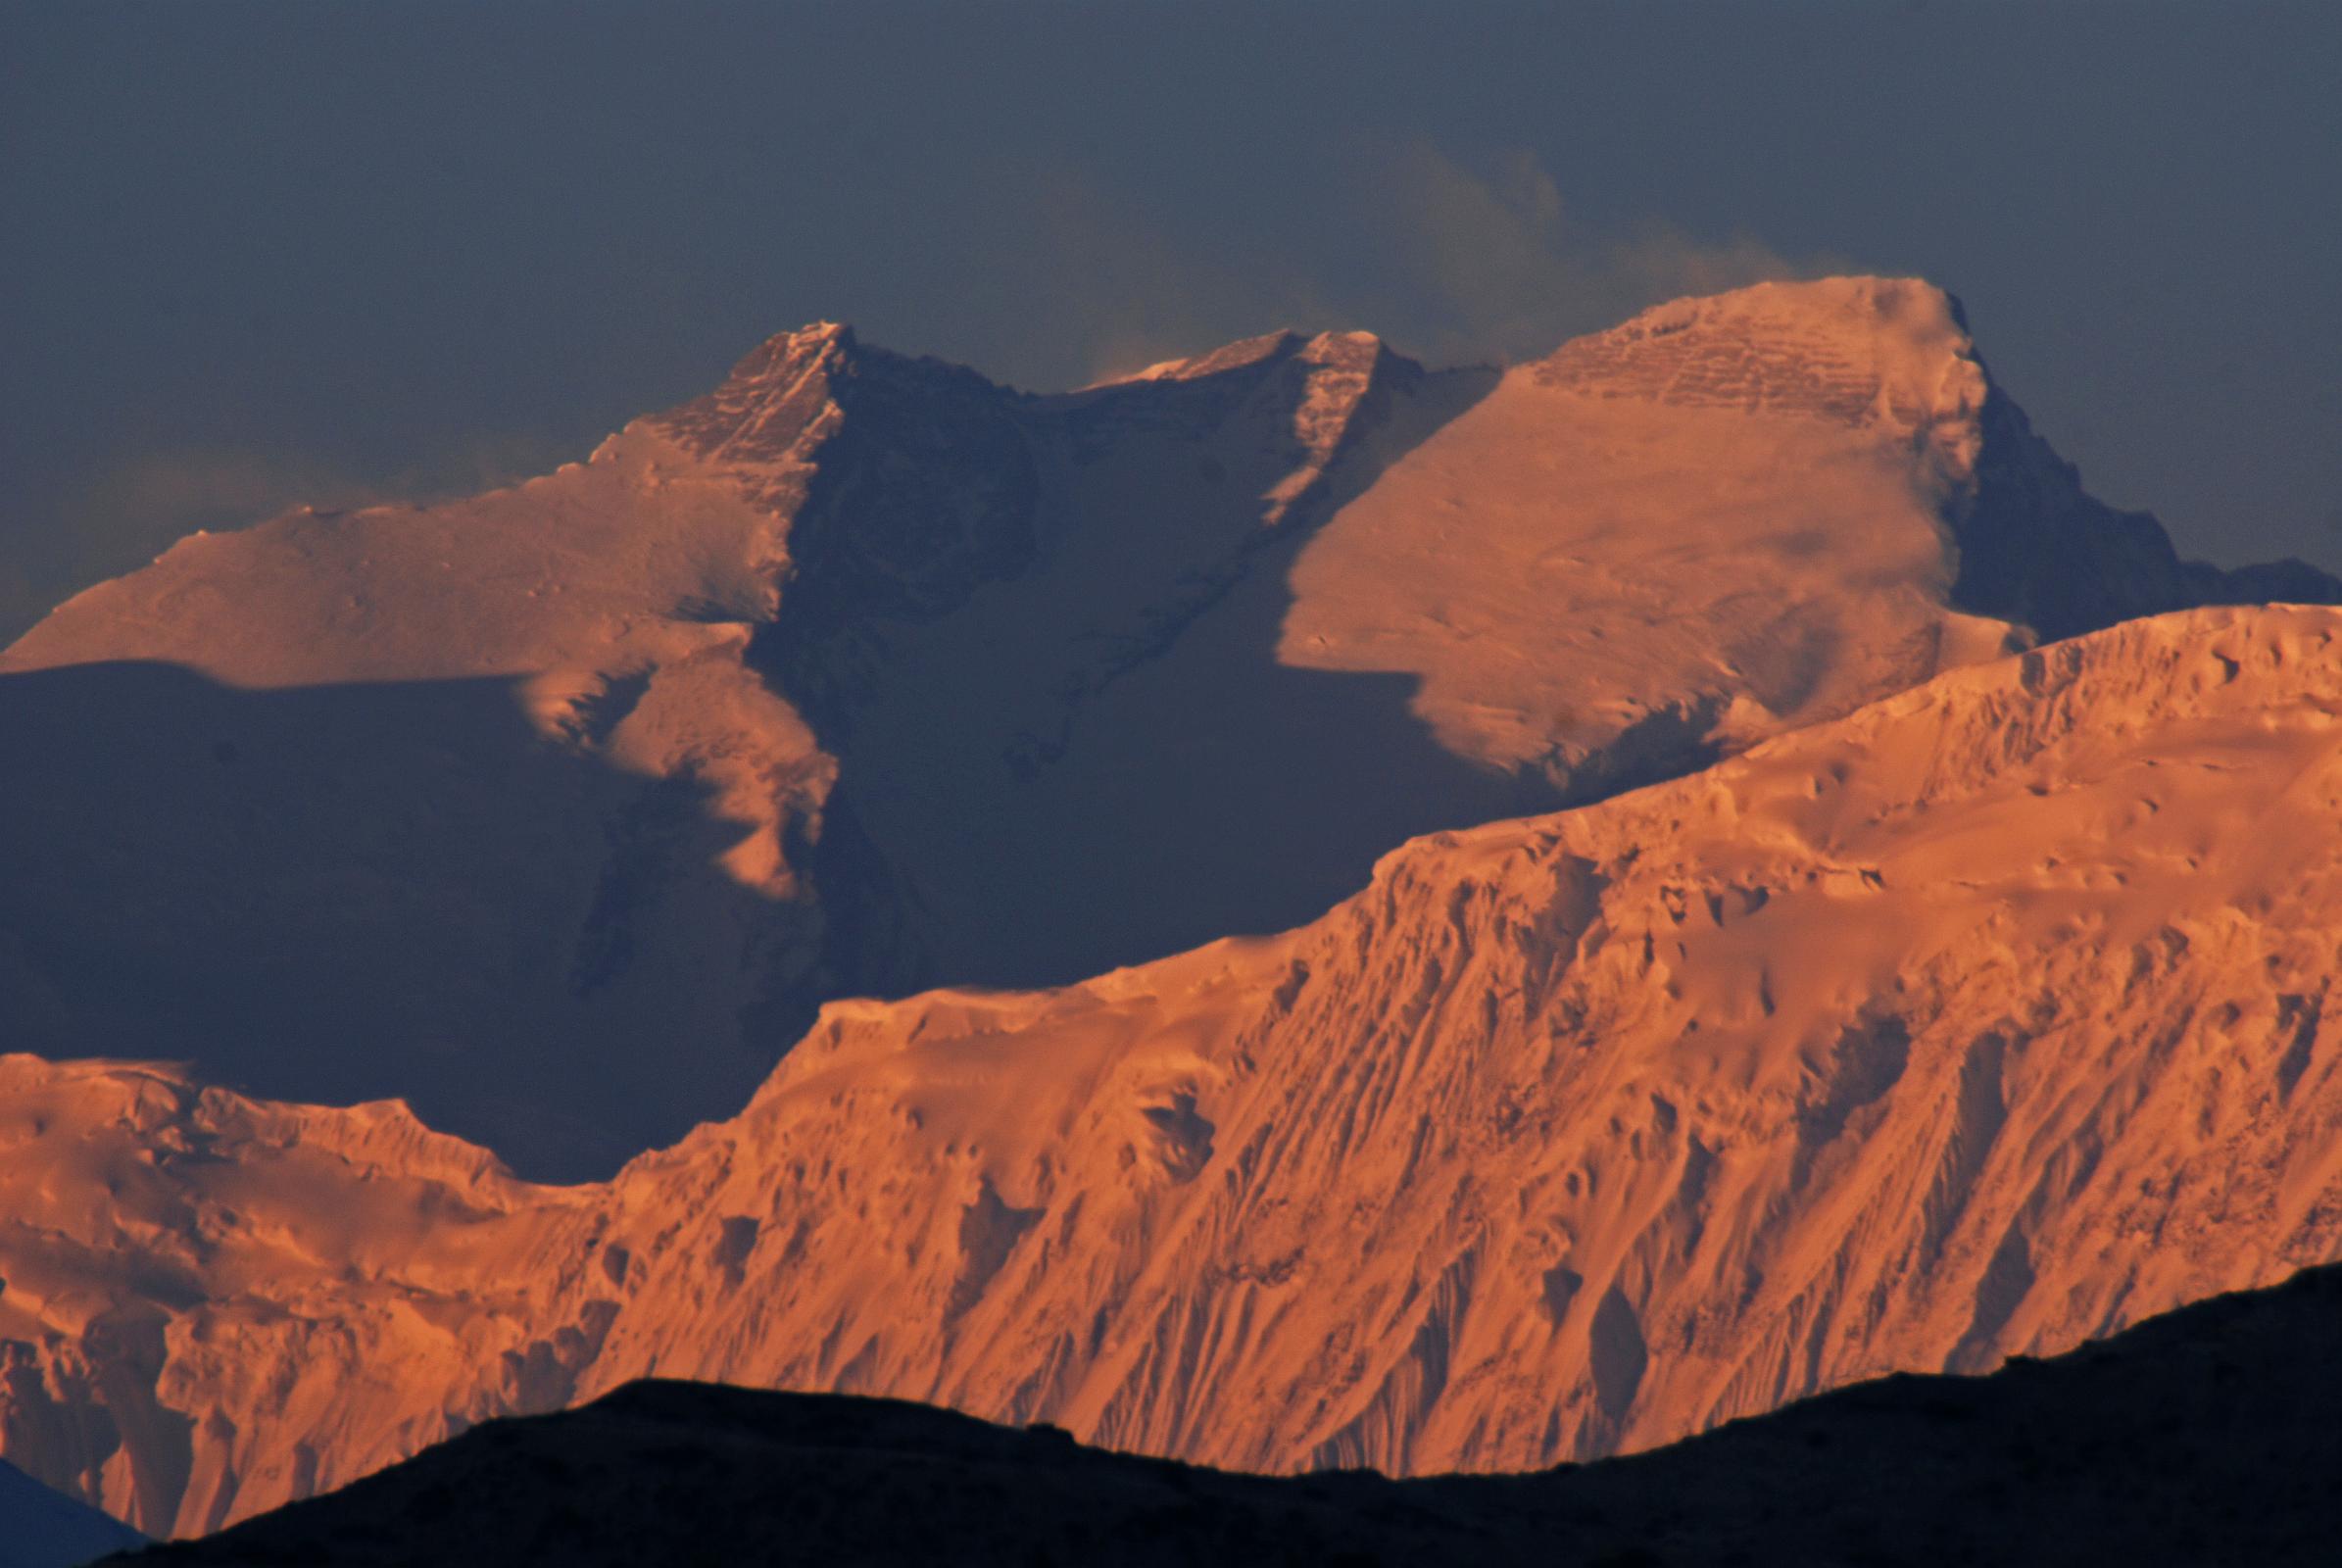 Mustang 02 11-3 Annapurna East, Annapurna Central, and Annapurna Main From Geiling At Sunset